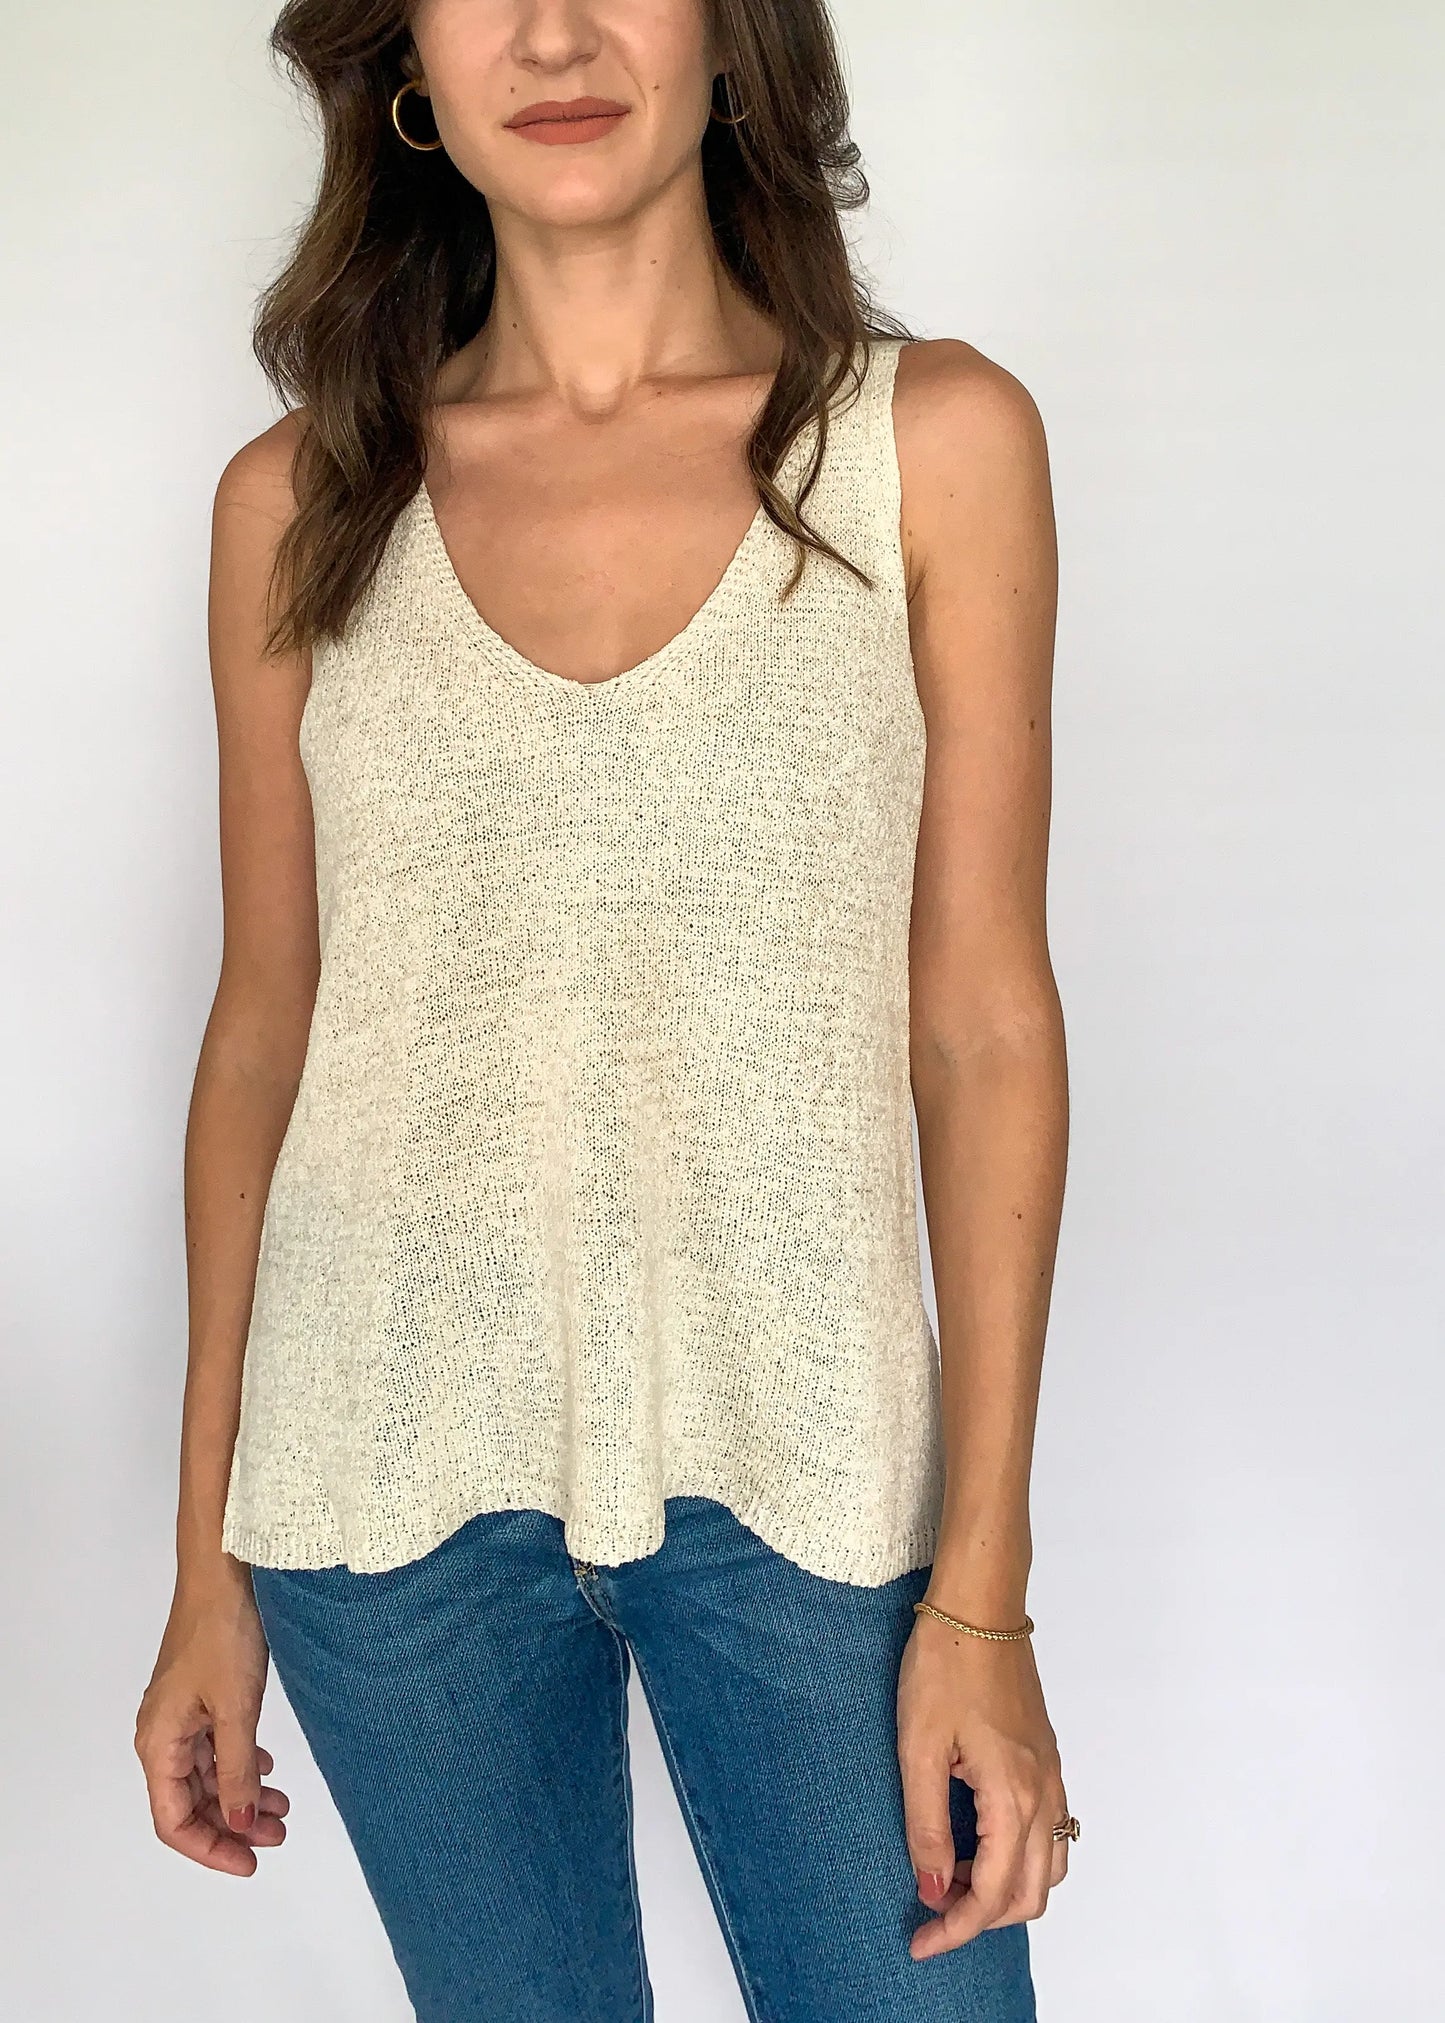 The Tiny Details Cream Solid Knit Tank Top